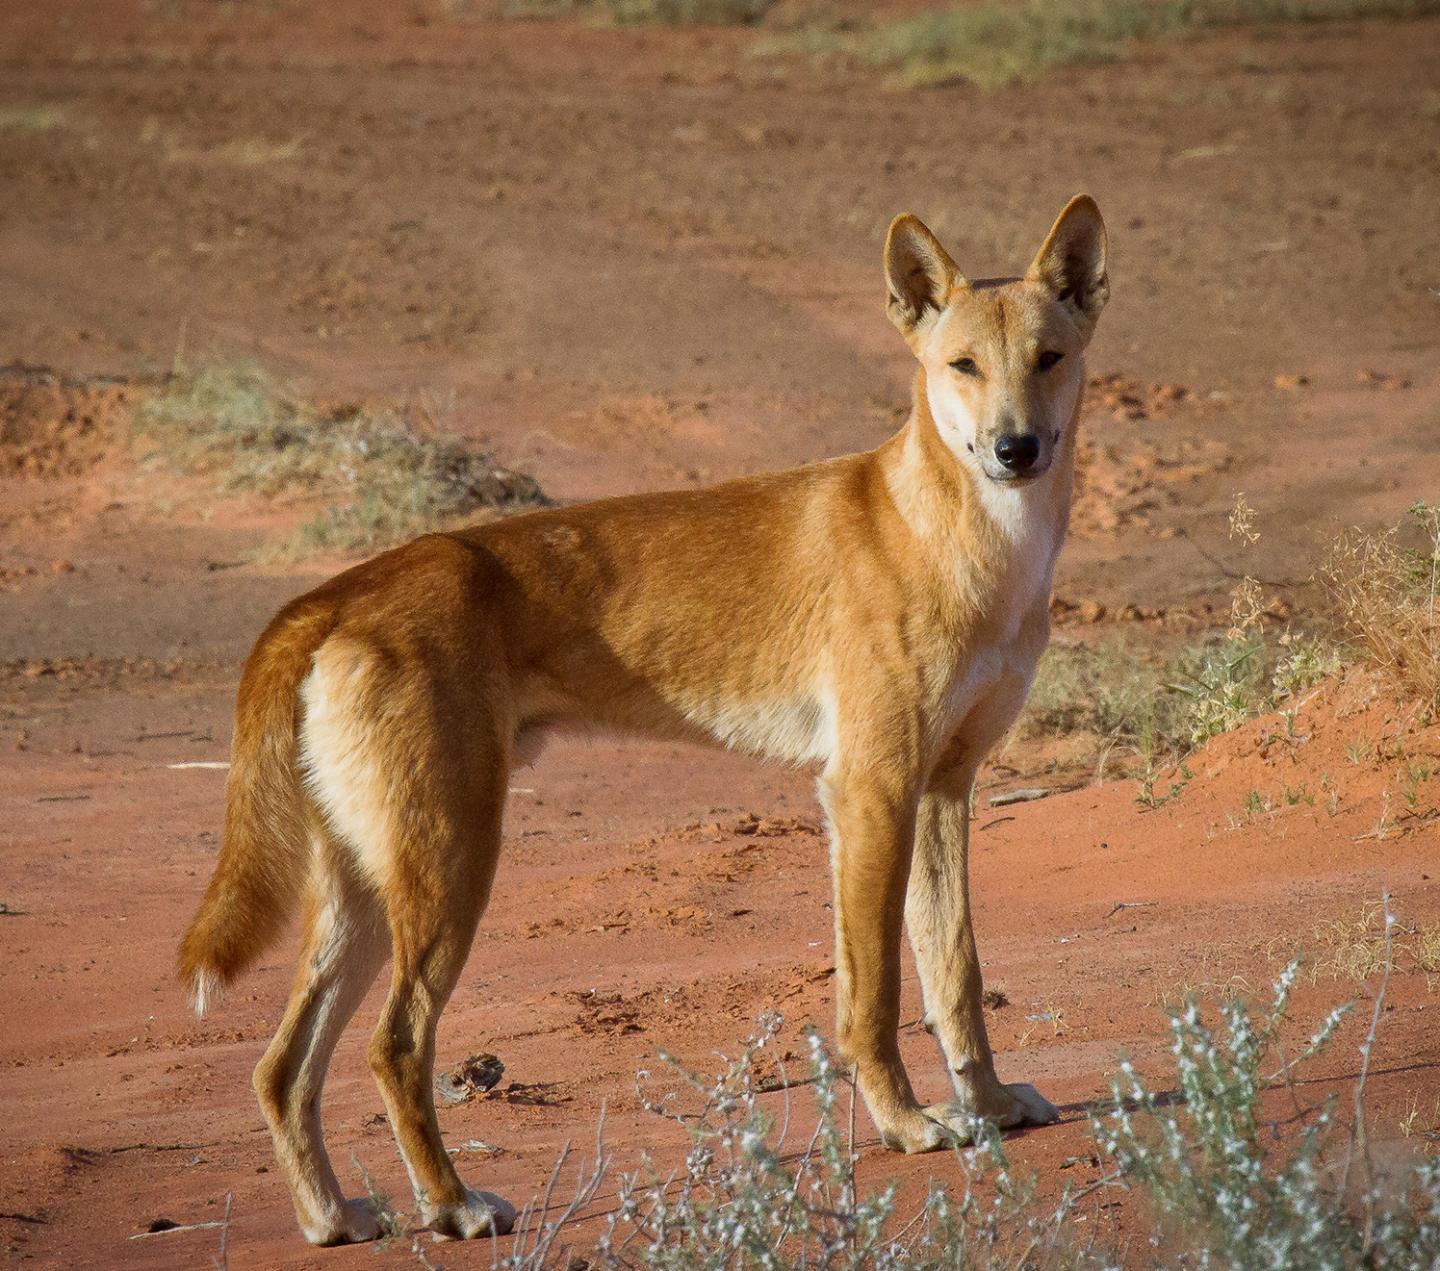 Proposal for Dingo Experiment in NSW National Park, Australia